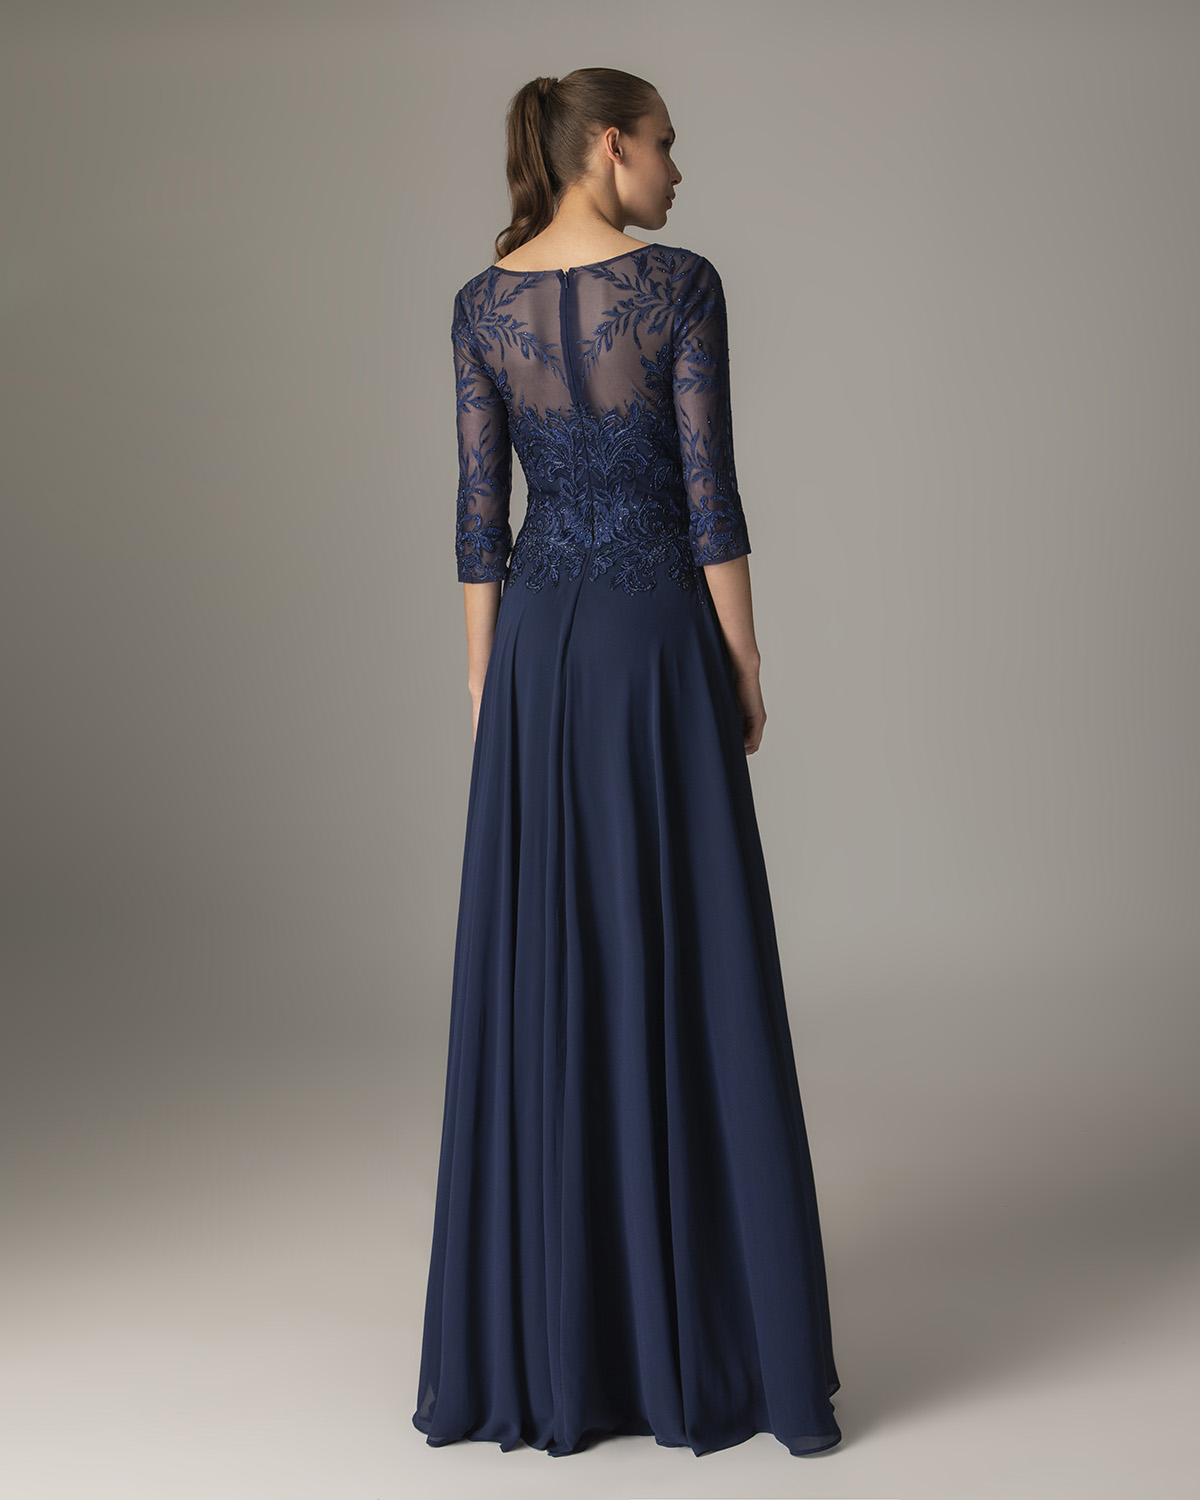 Classic Dresses / Long chiffon dress with fully beaded top and long sleeves